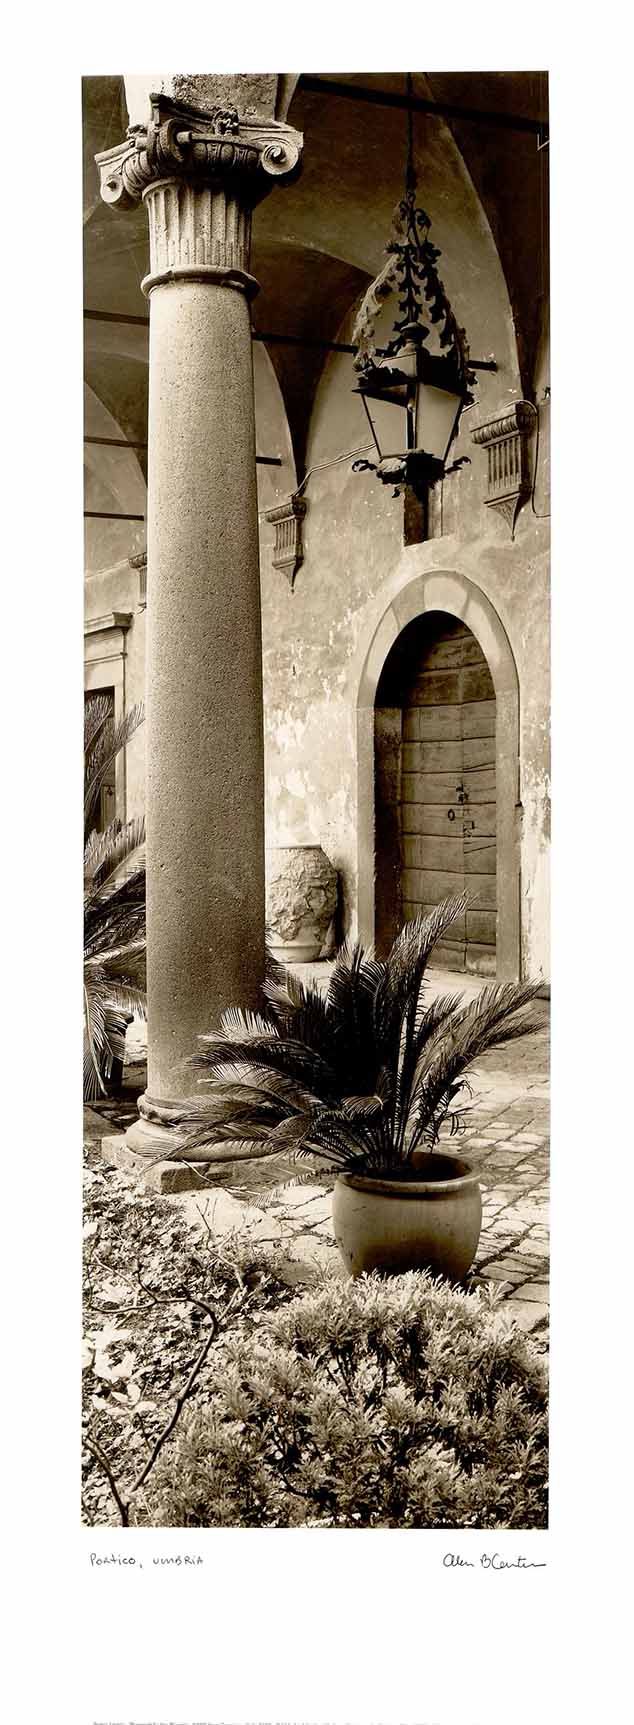 Portico, Umbria by Alan Blaustein - 9 X 24 Inches (Poster)